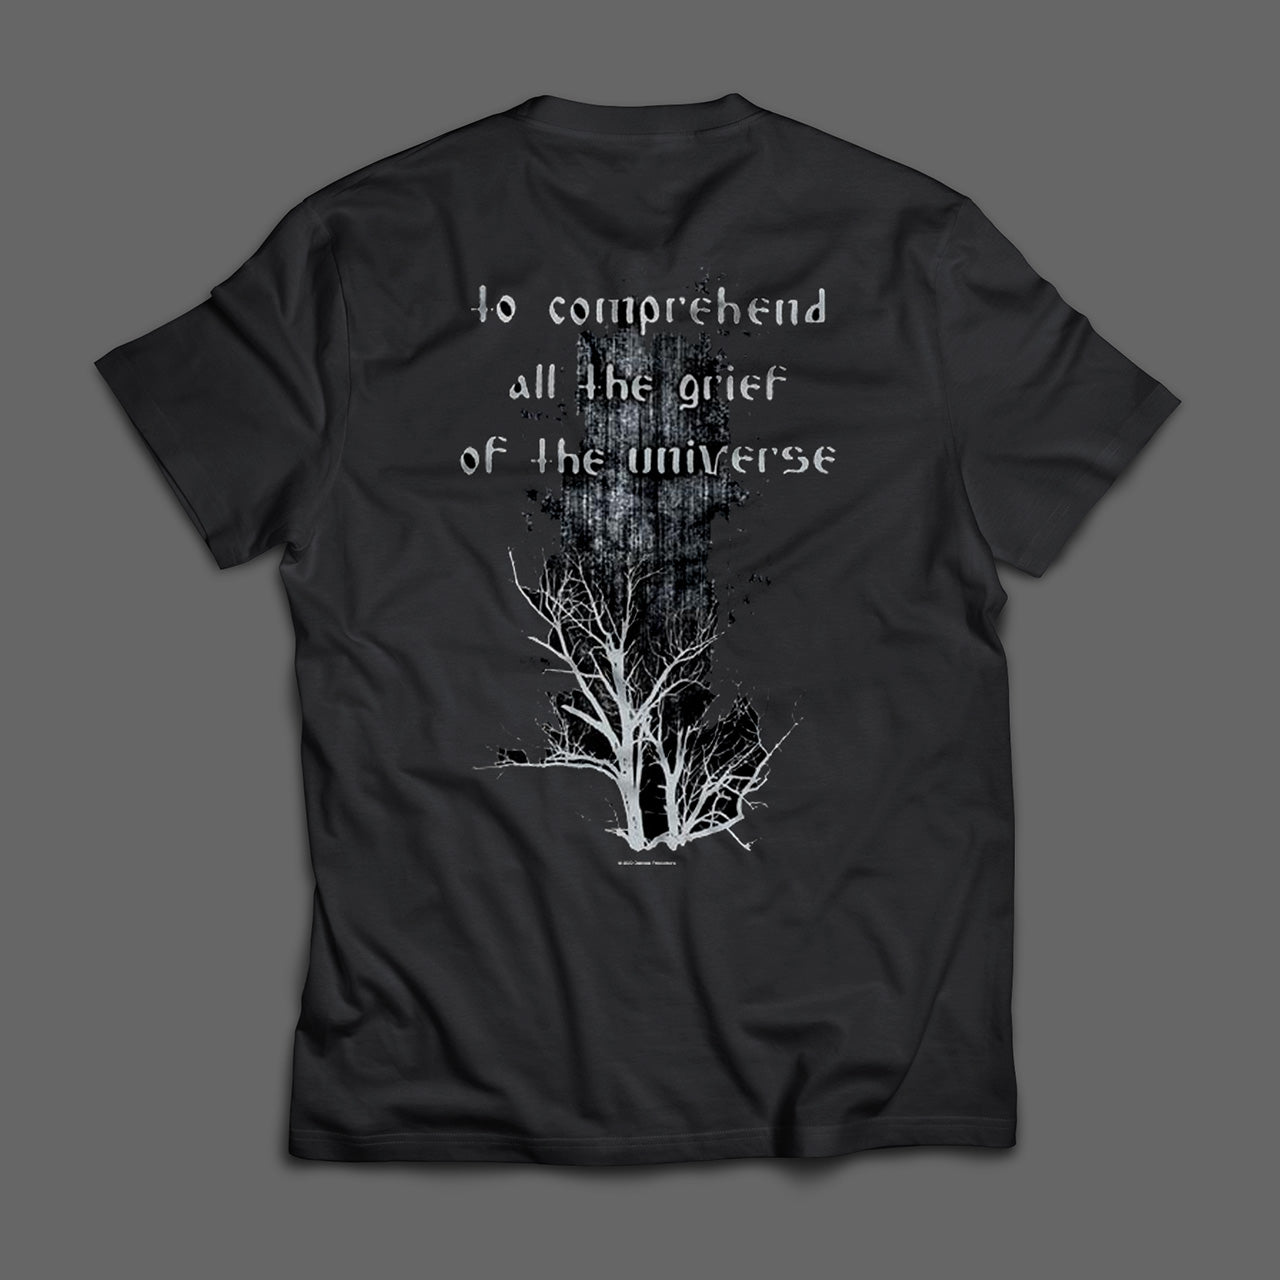 Hate Forest - Sorrow (T-Shirt)